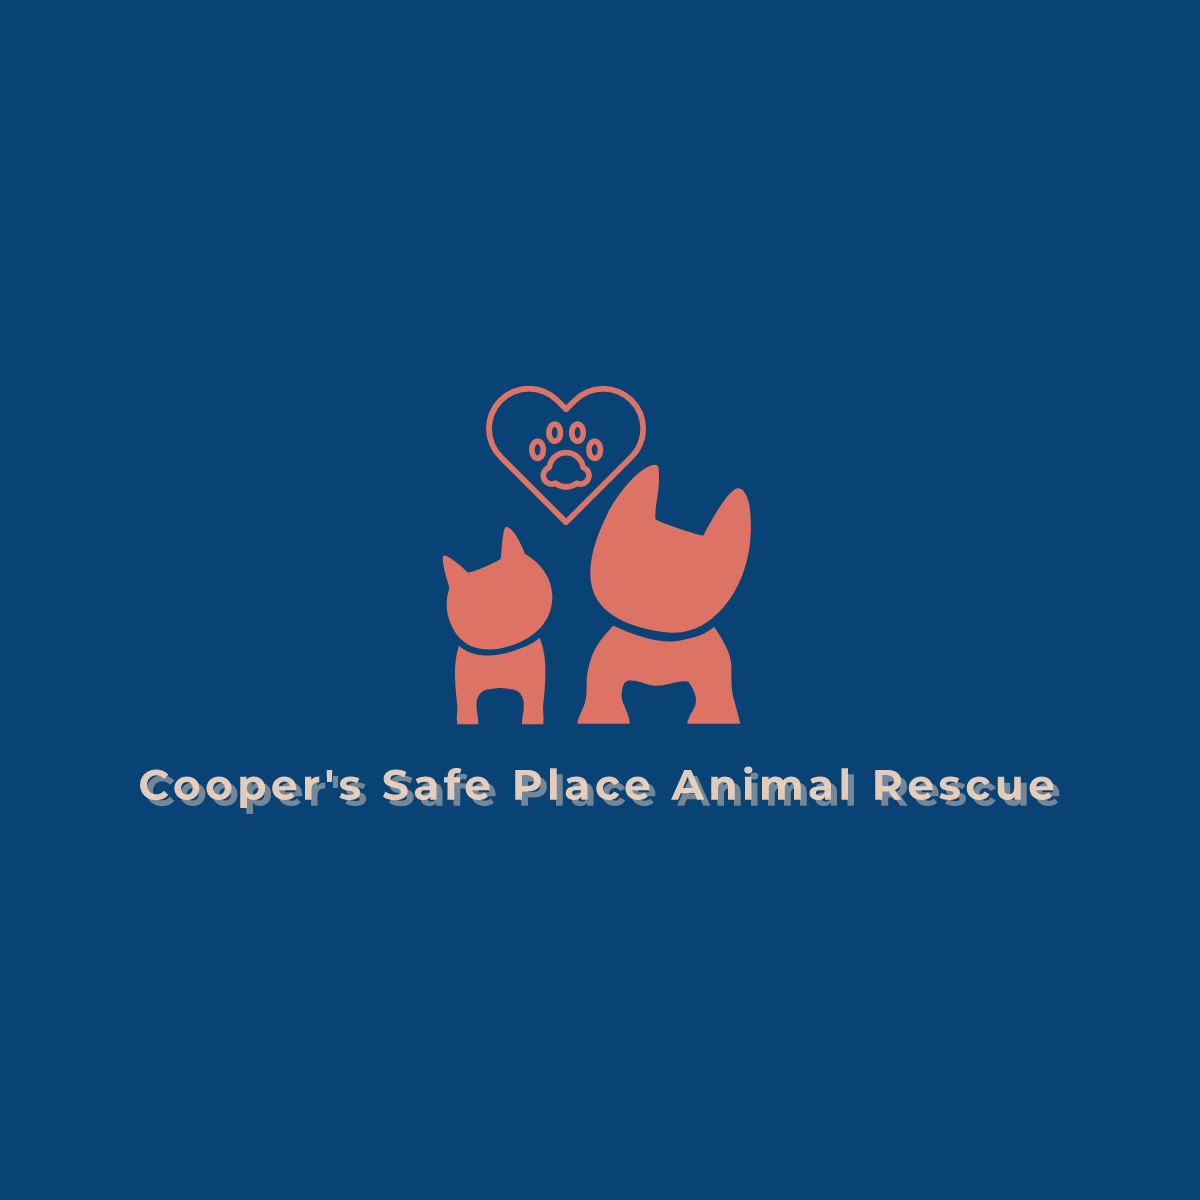 Cooper's Safe Place Animal Rescue